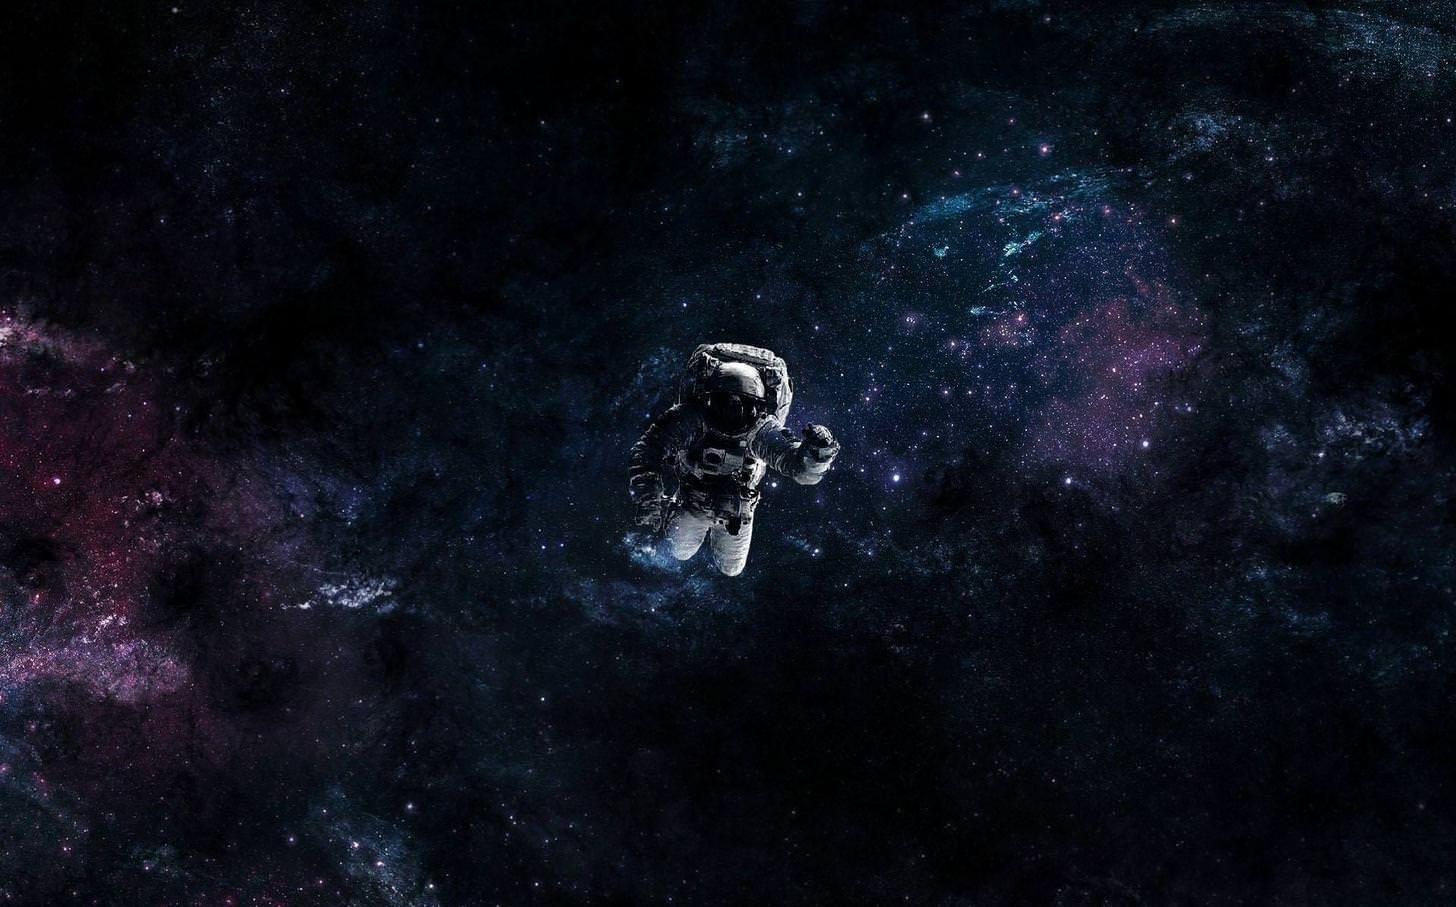 Astronaut floating in space. Astronaut wallpaper, Outer space wallpaper, Wallpaper space